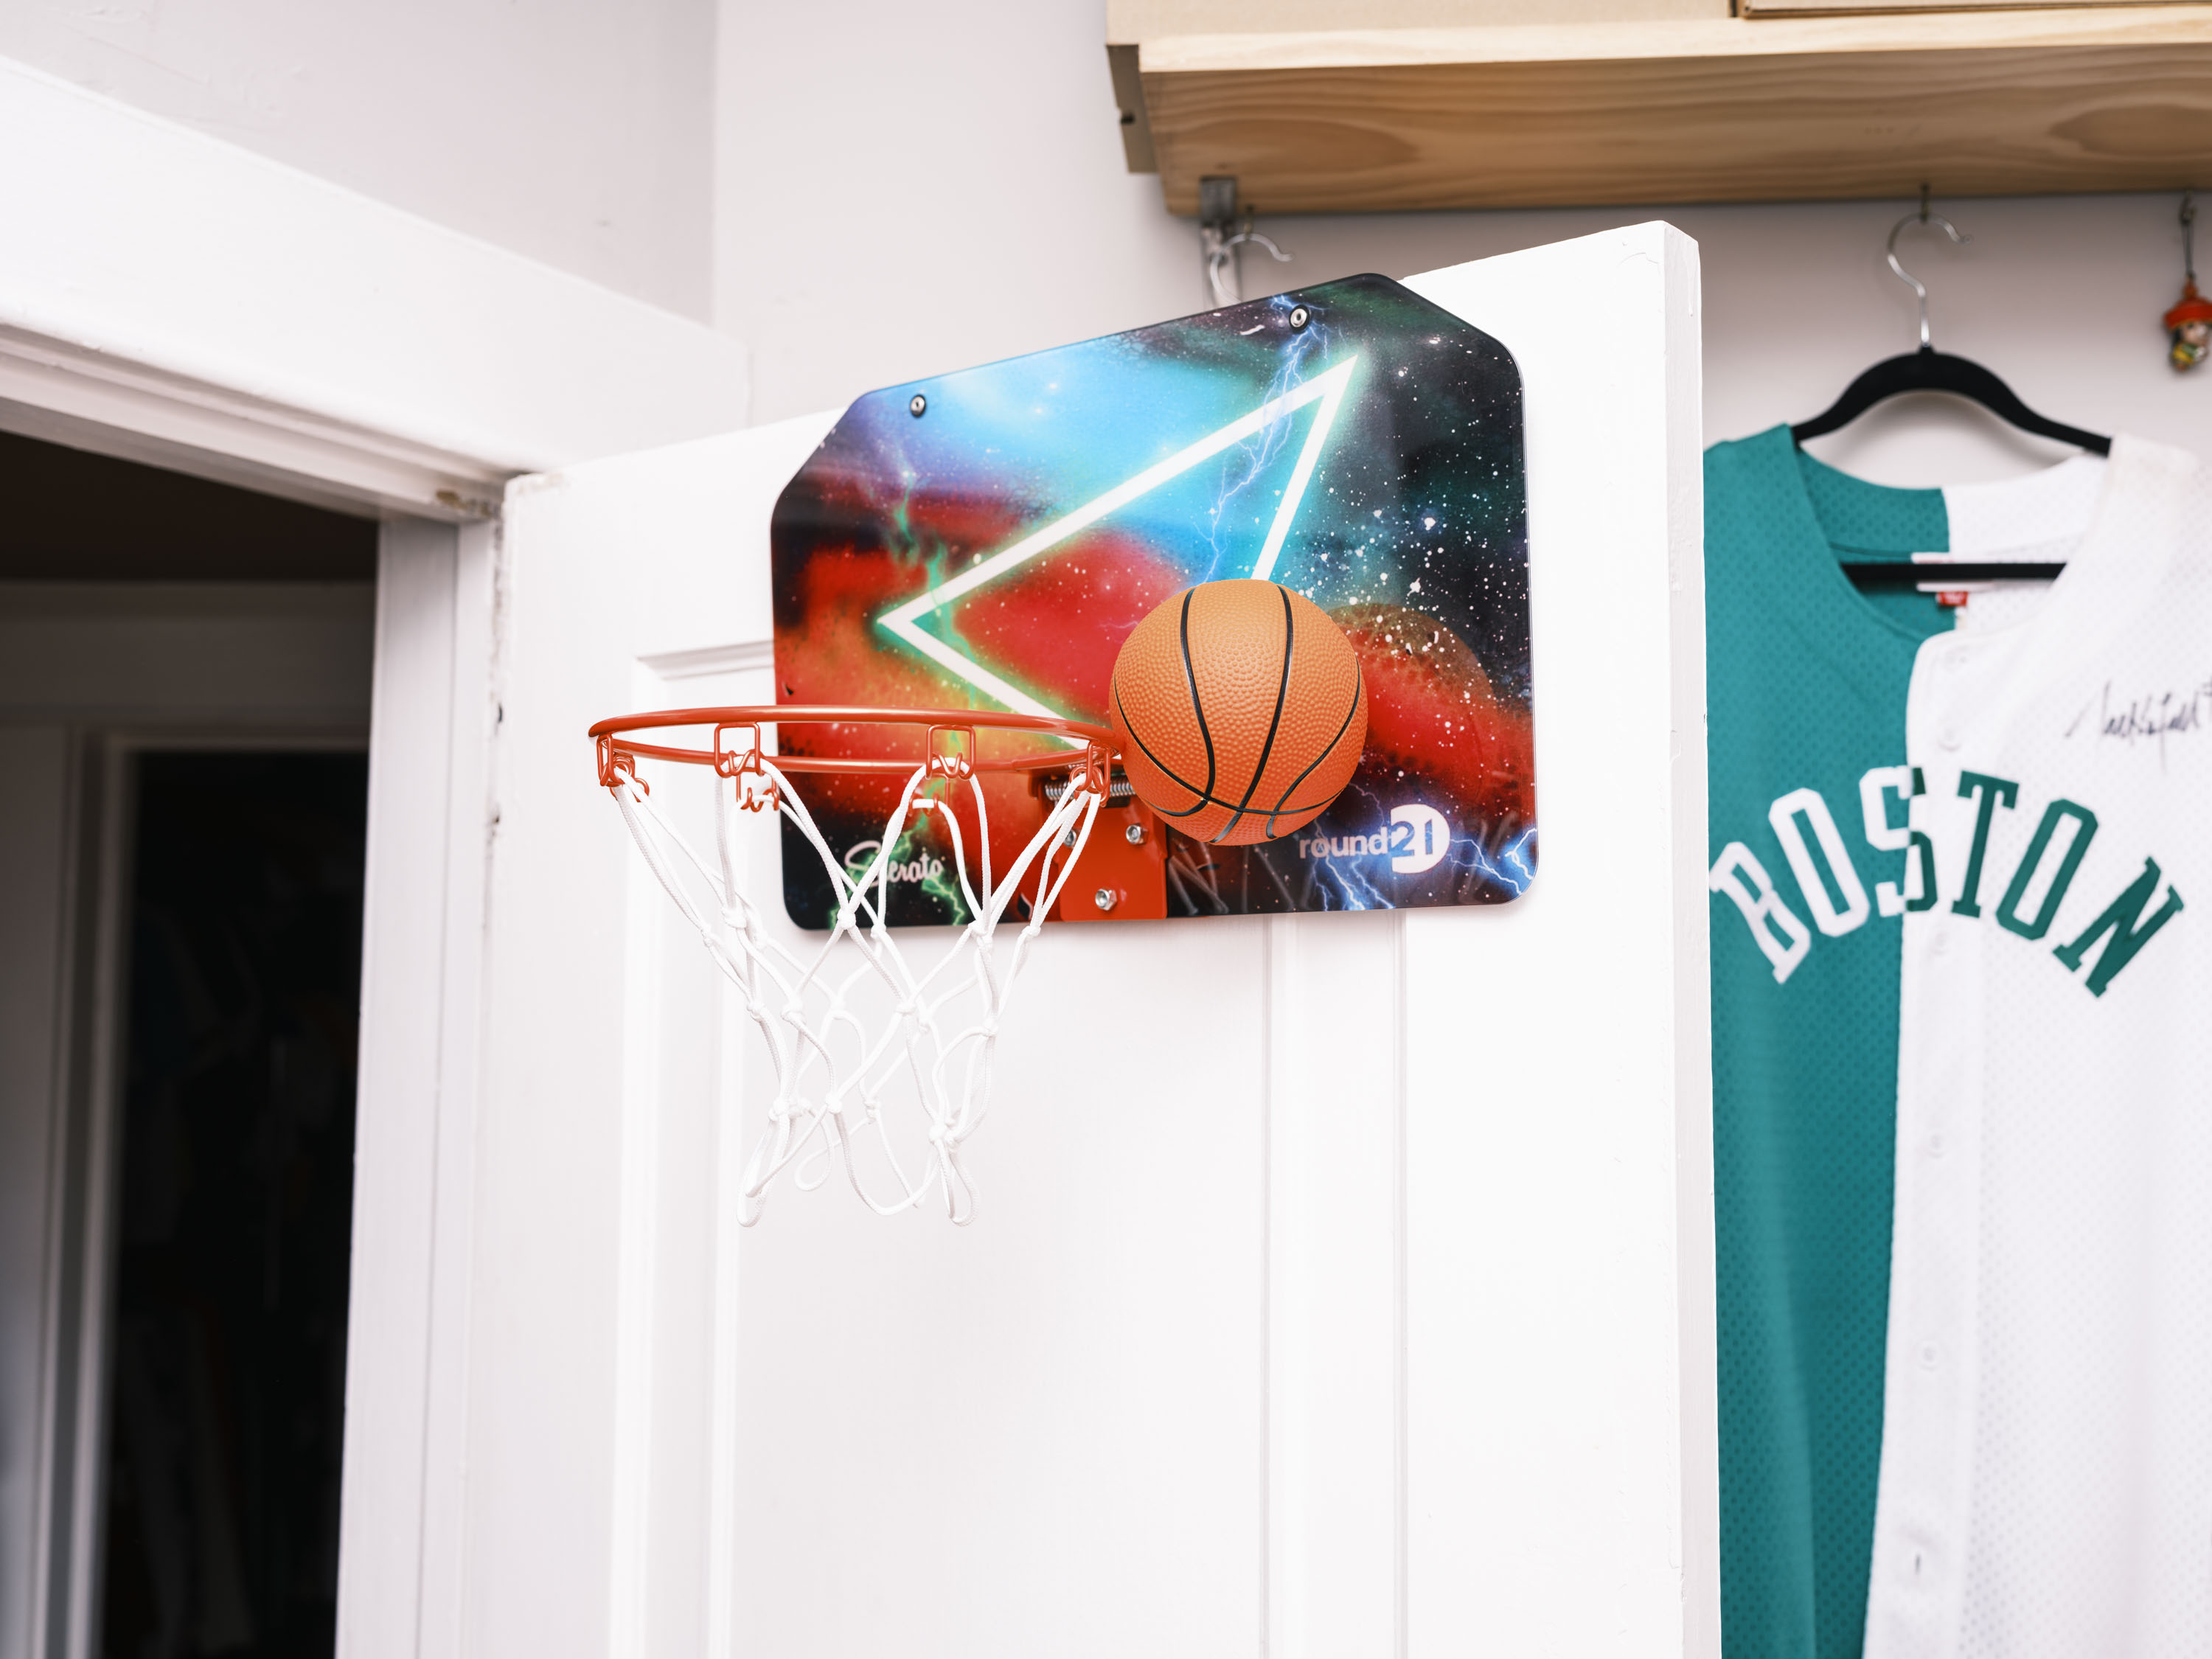 This backboard comes alive through Sierato's classic "galaxy" design. The backboard includes custom work for round21 to symbolize the youthful energy and power that fuels our desire to constantly create and express who we are. 